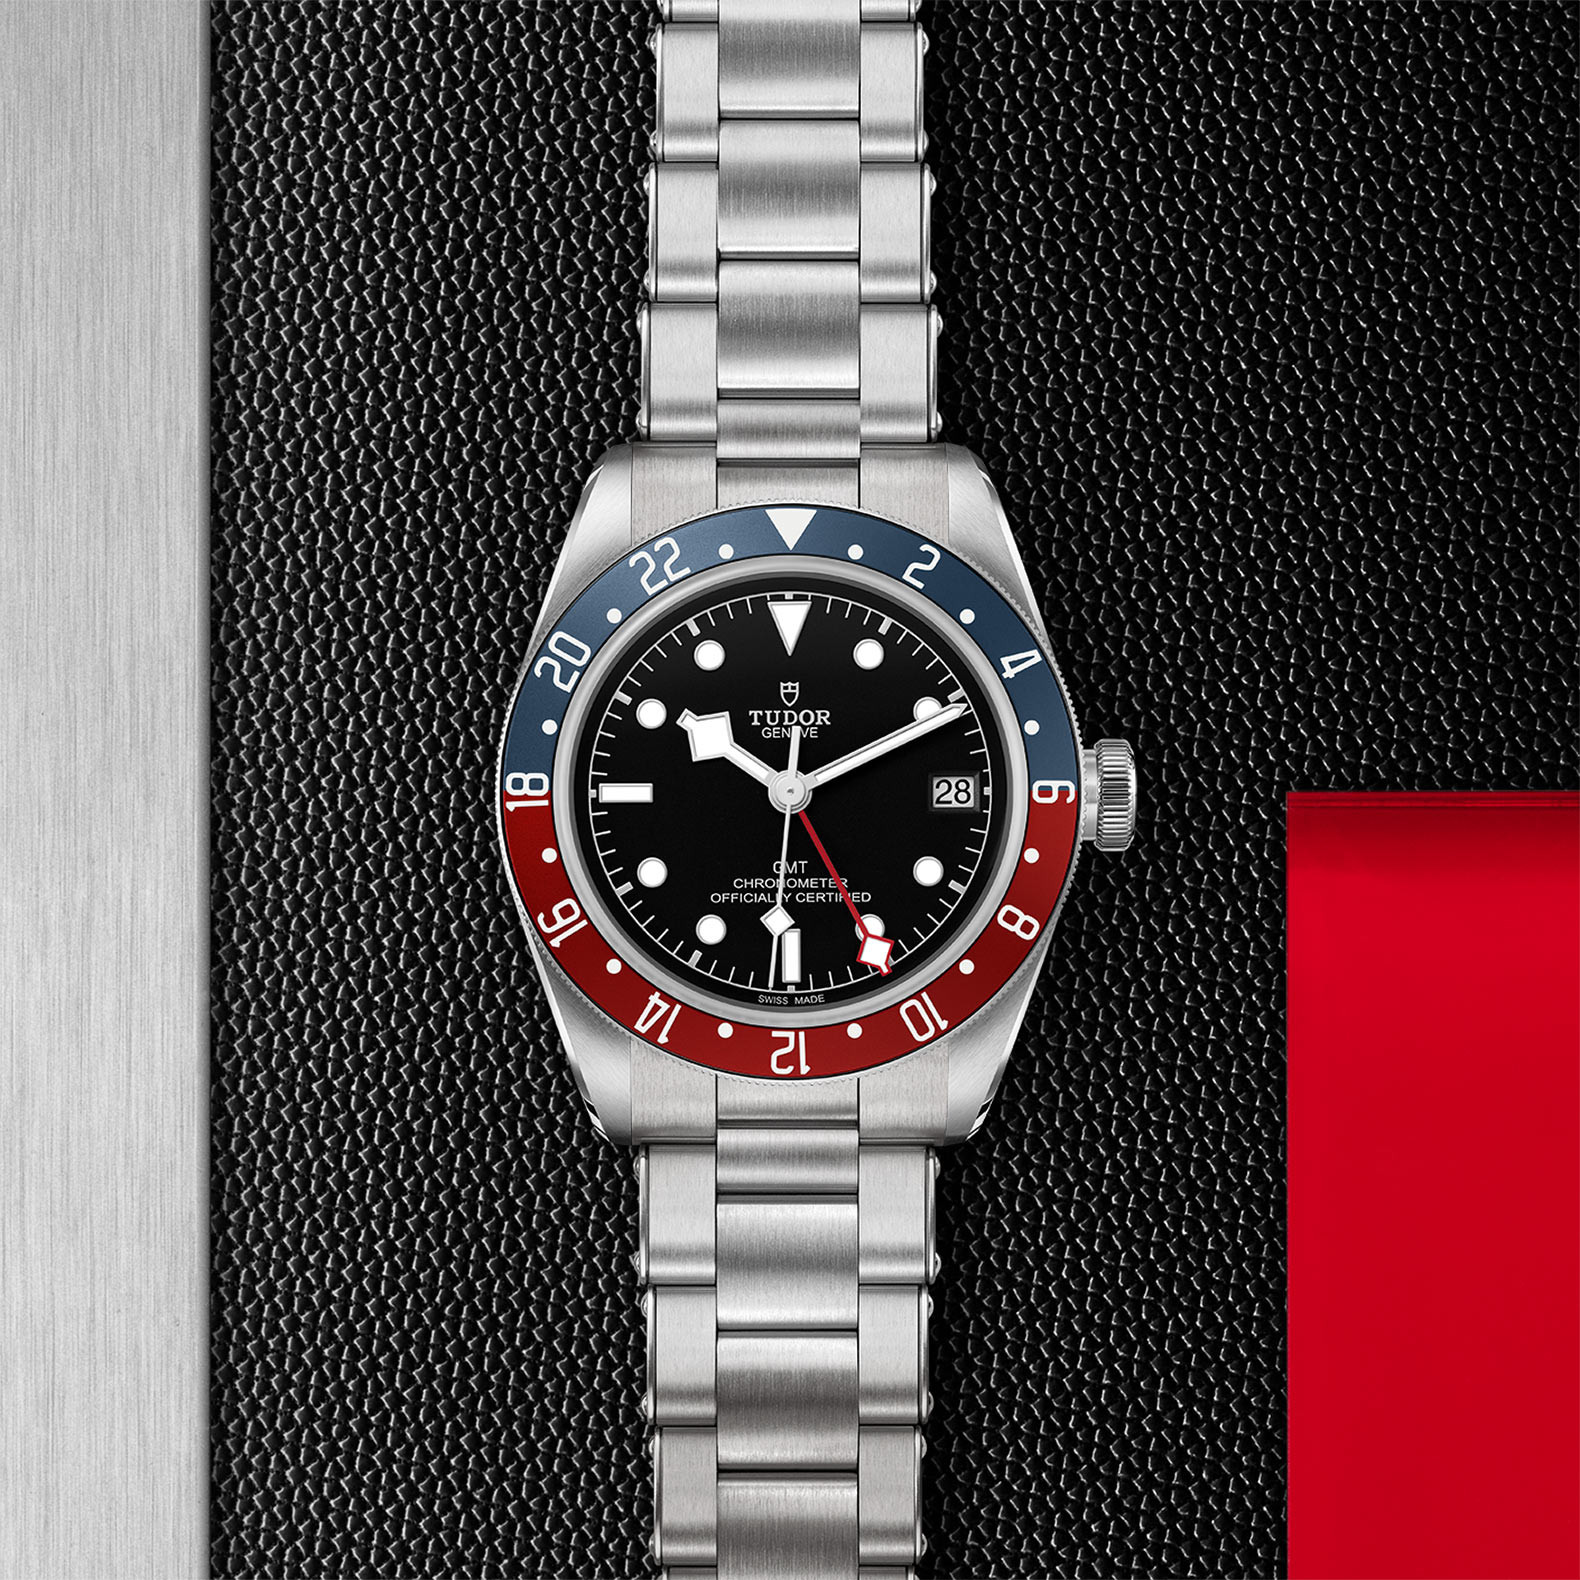 TUDOR Black Bay GMT Watch in Store Flat Lay